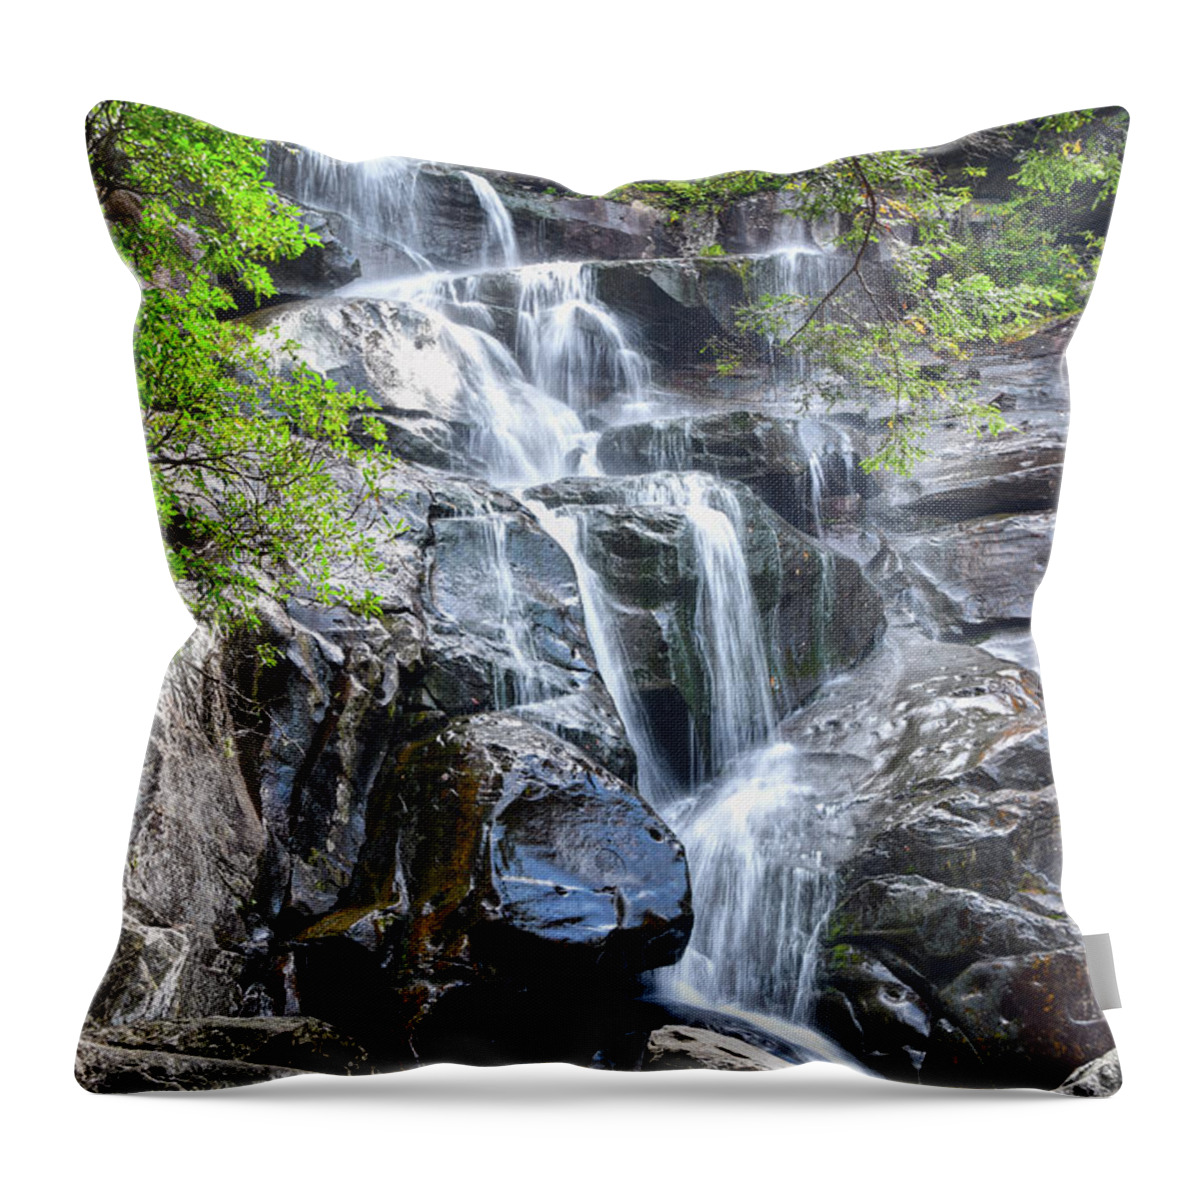 Ramsey Cascades Throw Pillow featuring the photograph Ramsey Cascades 8 by Phil Perkins